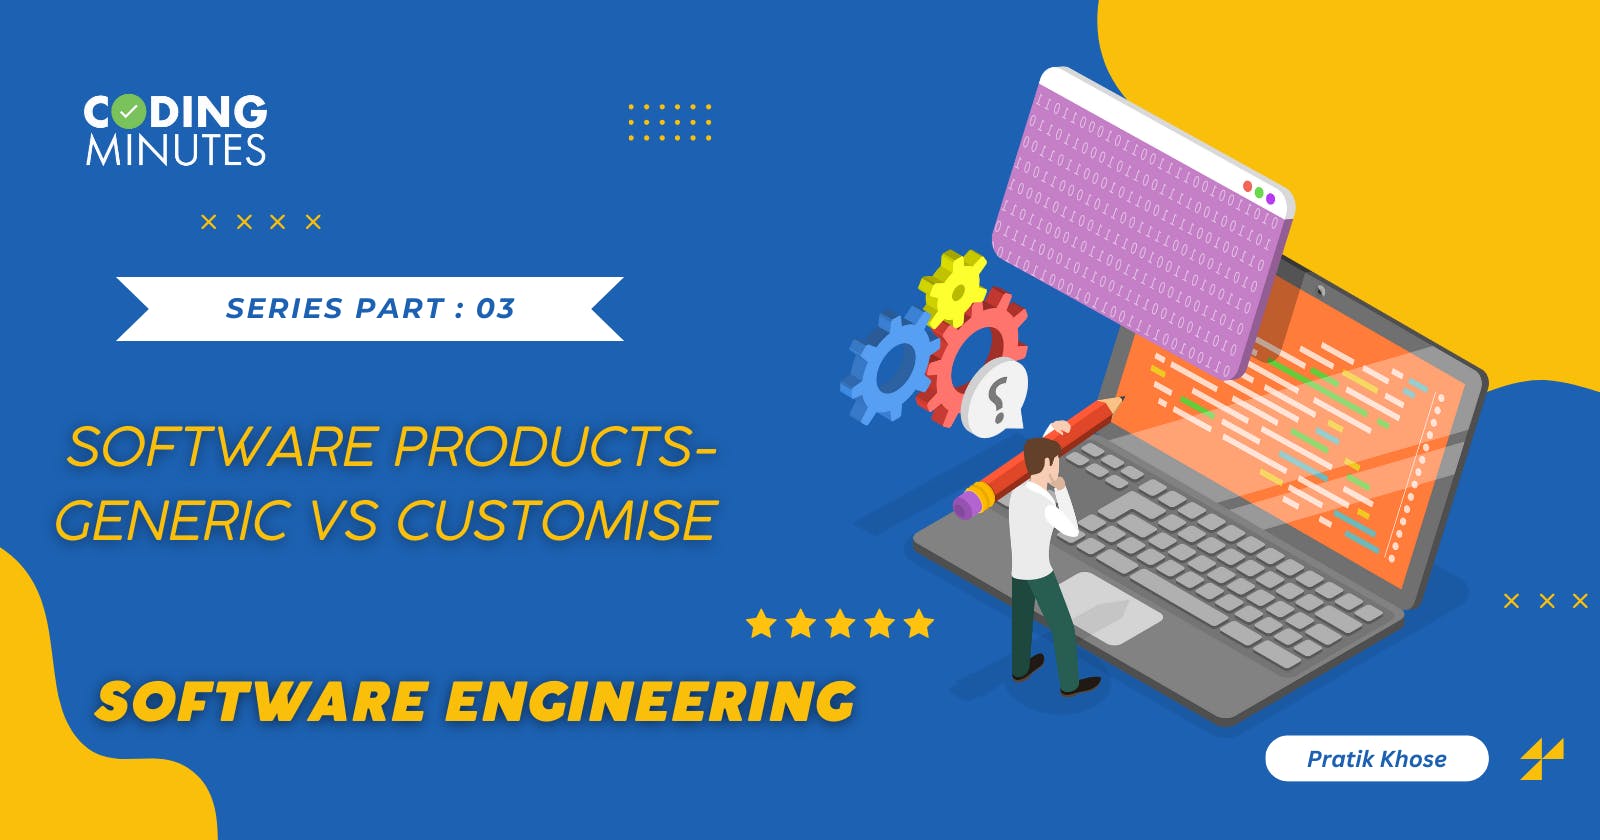 Software Products- Generic vs Customise